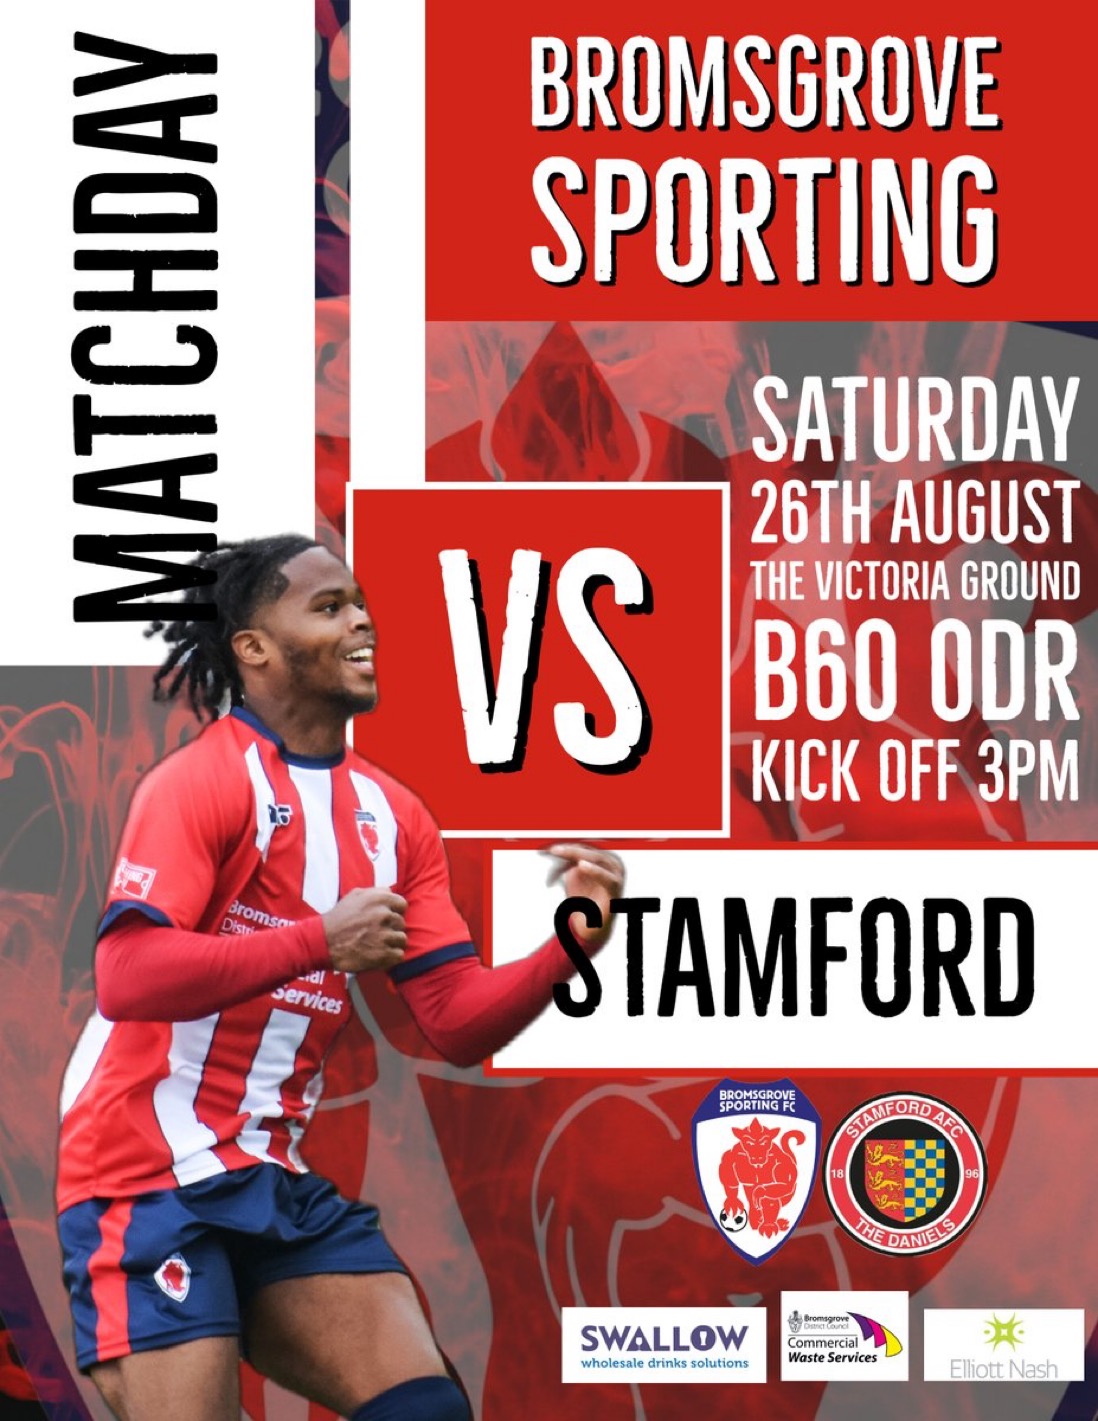 MATCH PREVIEW: Ahead of Today’s Home League fixture v STAMFORD